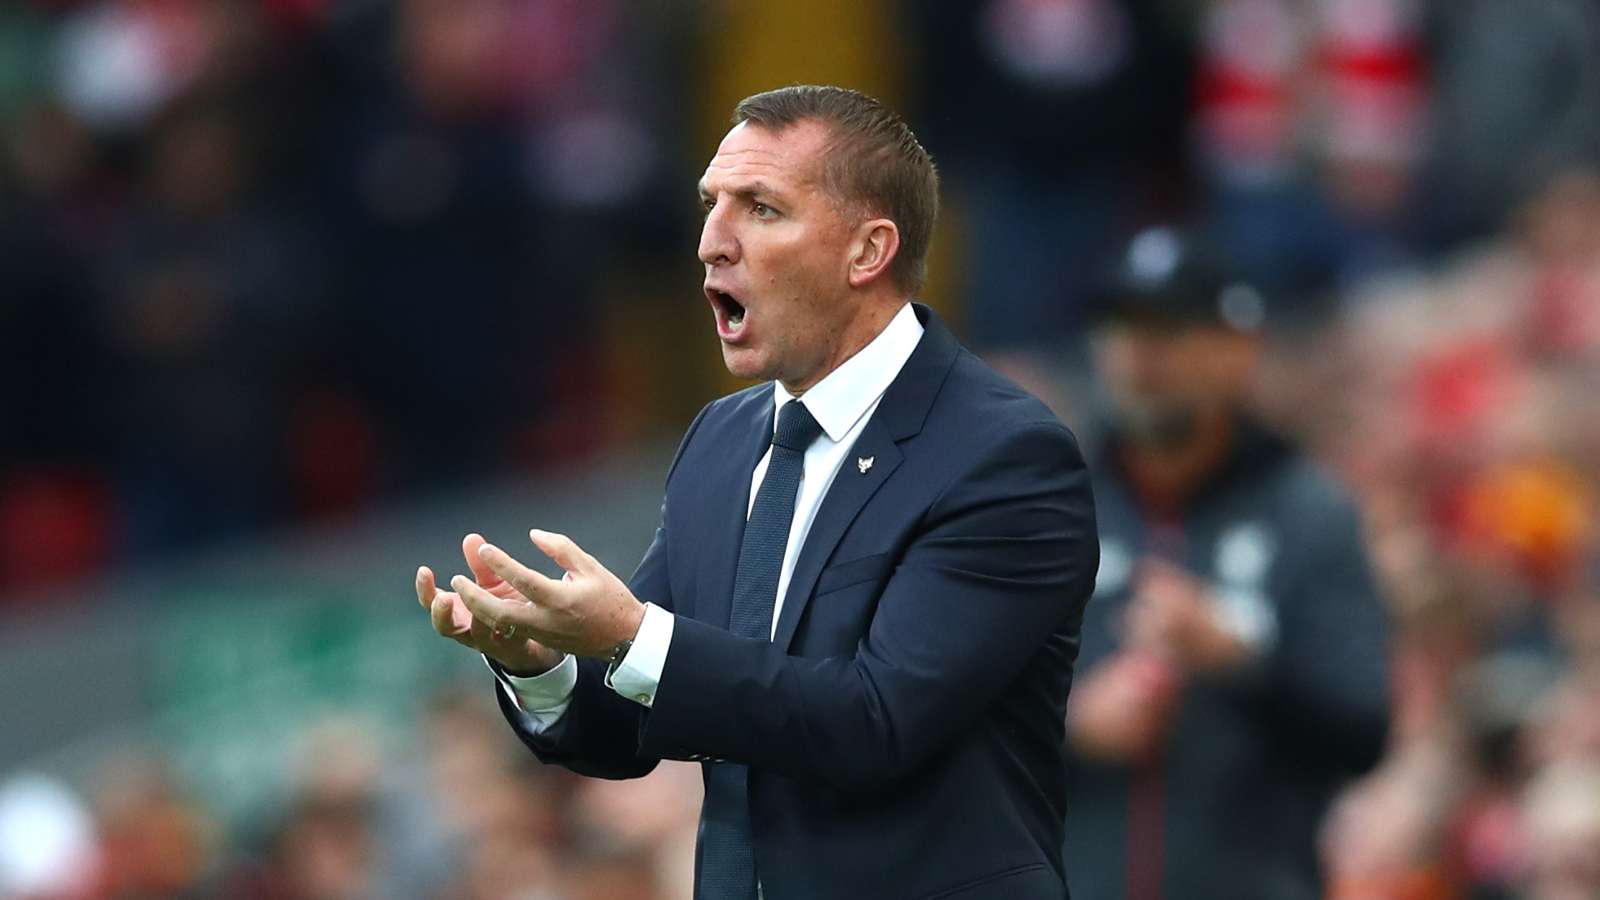 ‘I could hardly walk’ – Leicester manager Rodgers confirms he had coronavirus